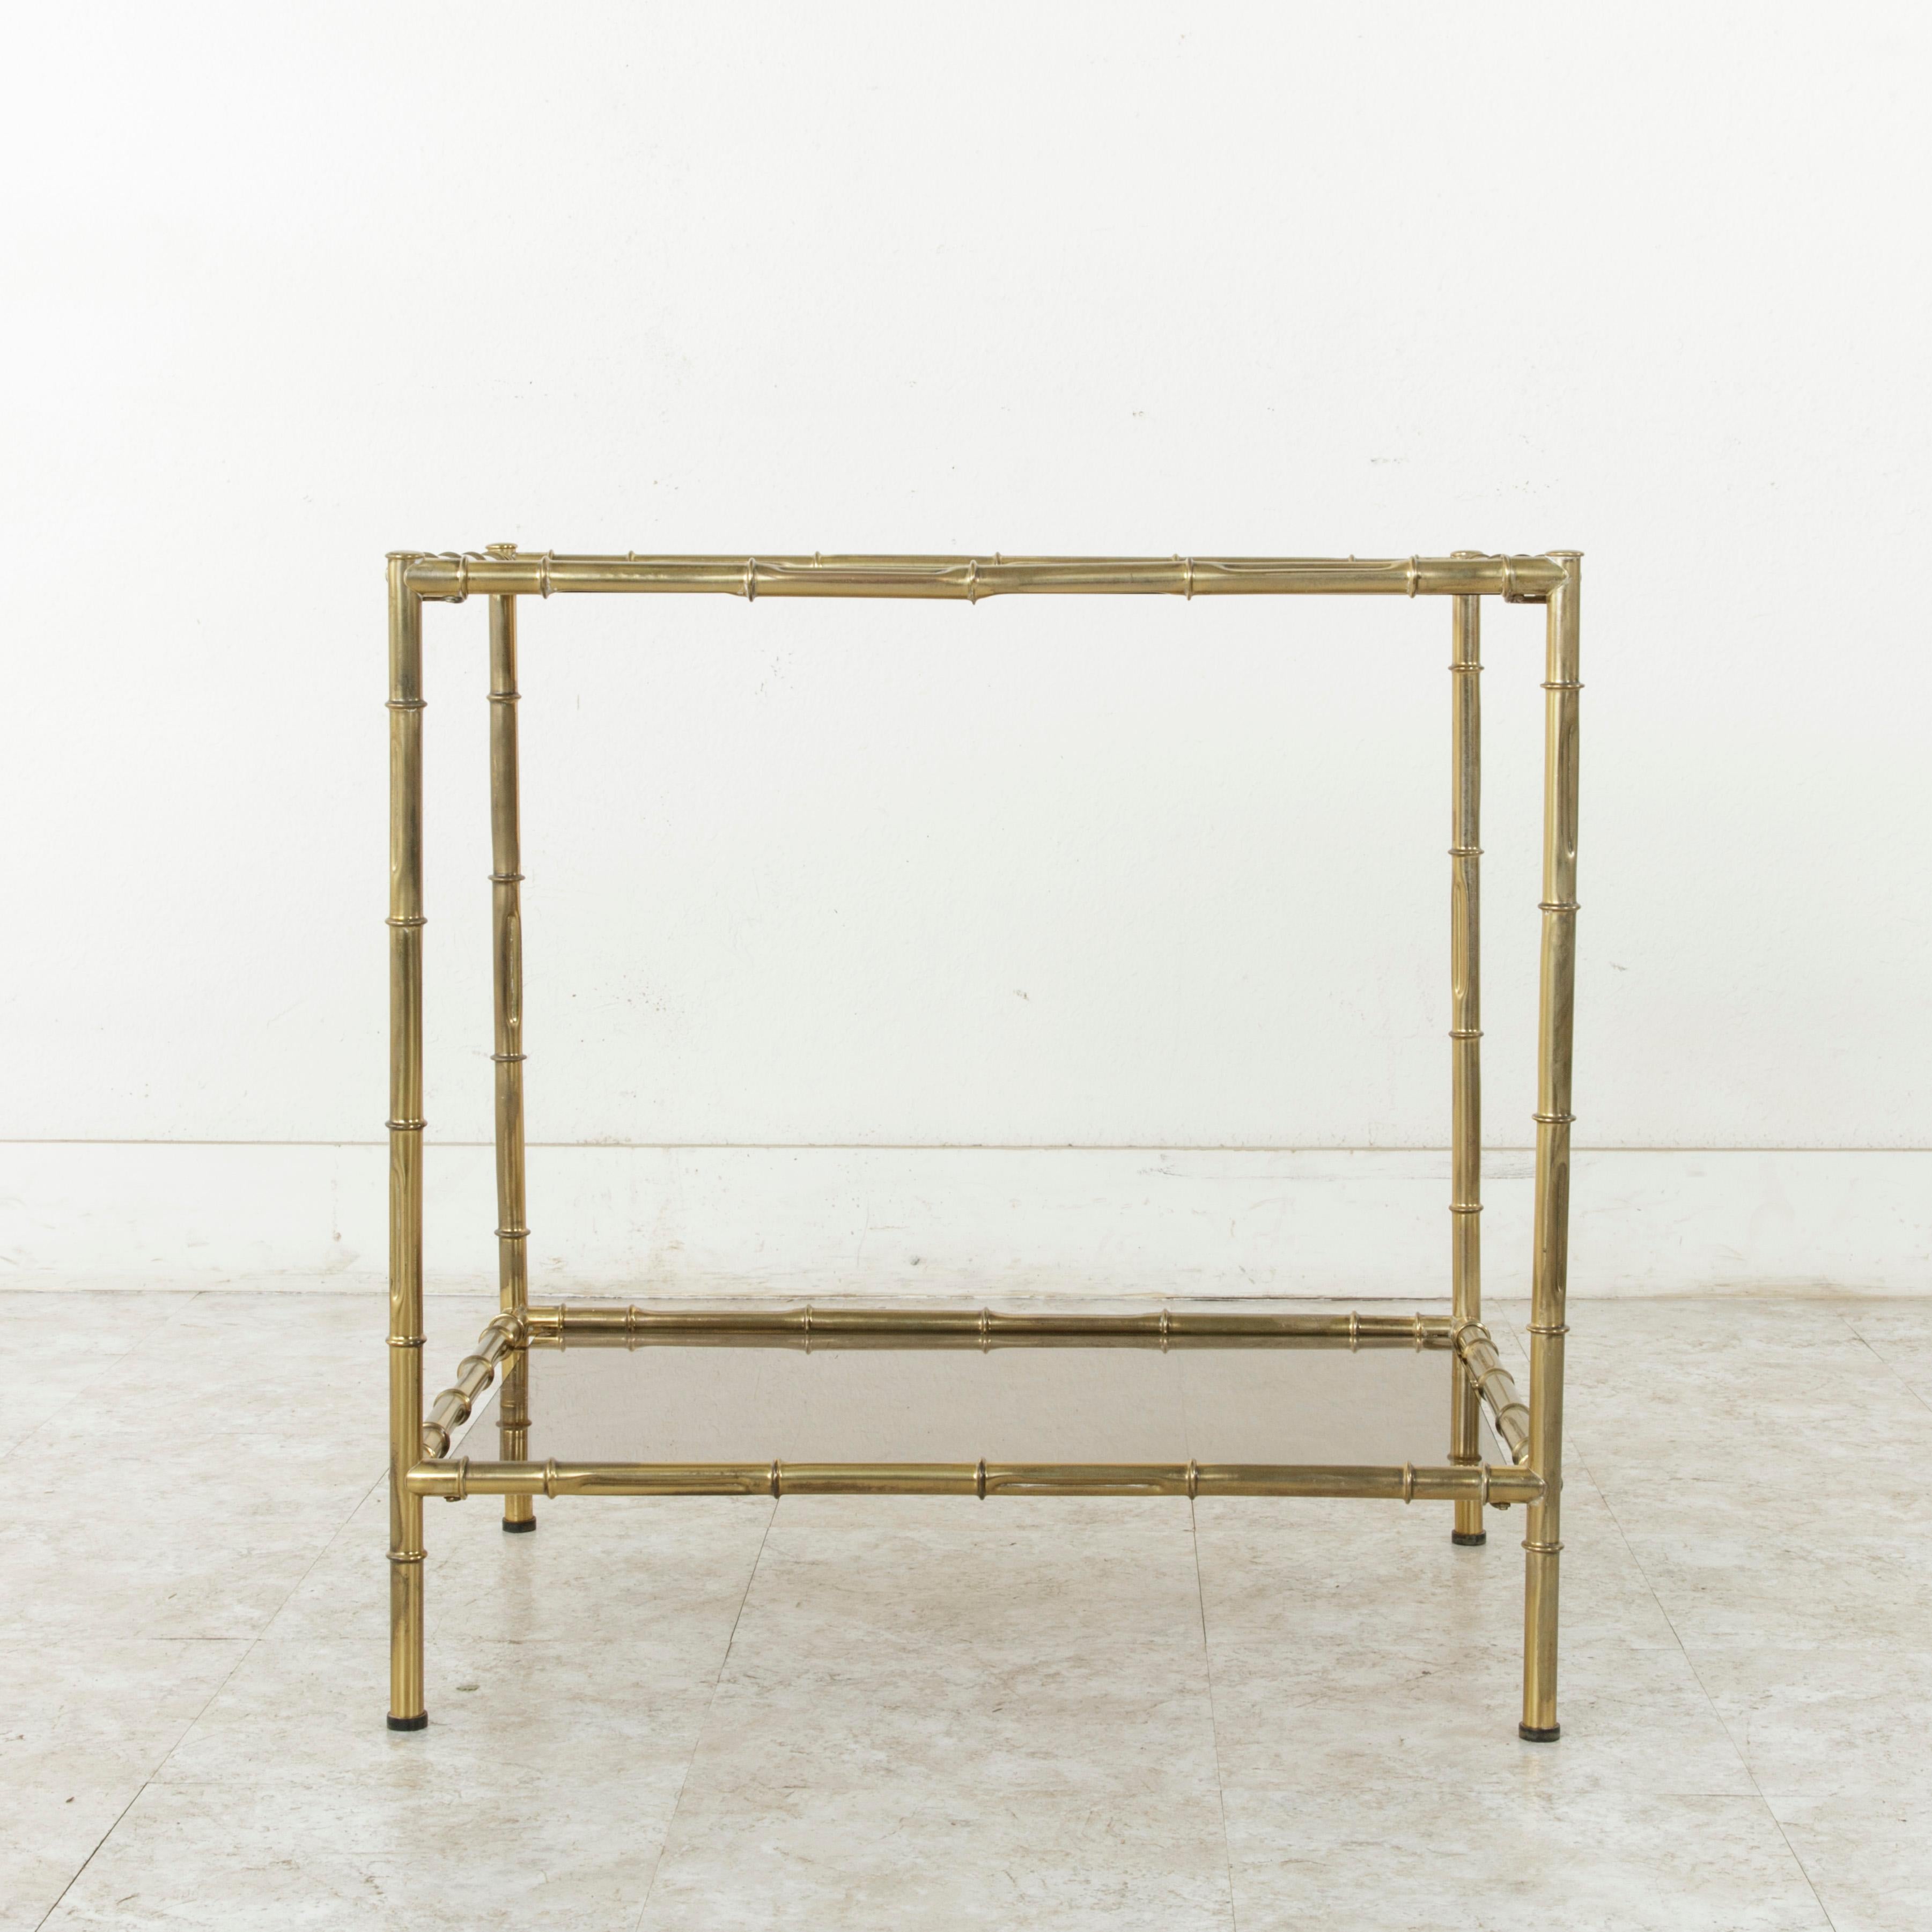 This mid-20th century French faux bamboo brass side table features an upper and lower shelf fitted with smoked glass. Its bamboo detailing includes indentations which imitate the growing pattern of the plant. A versatile serving piece that could